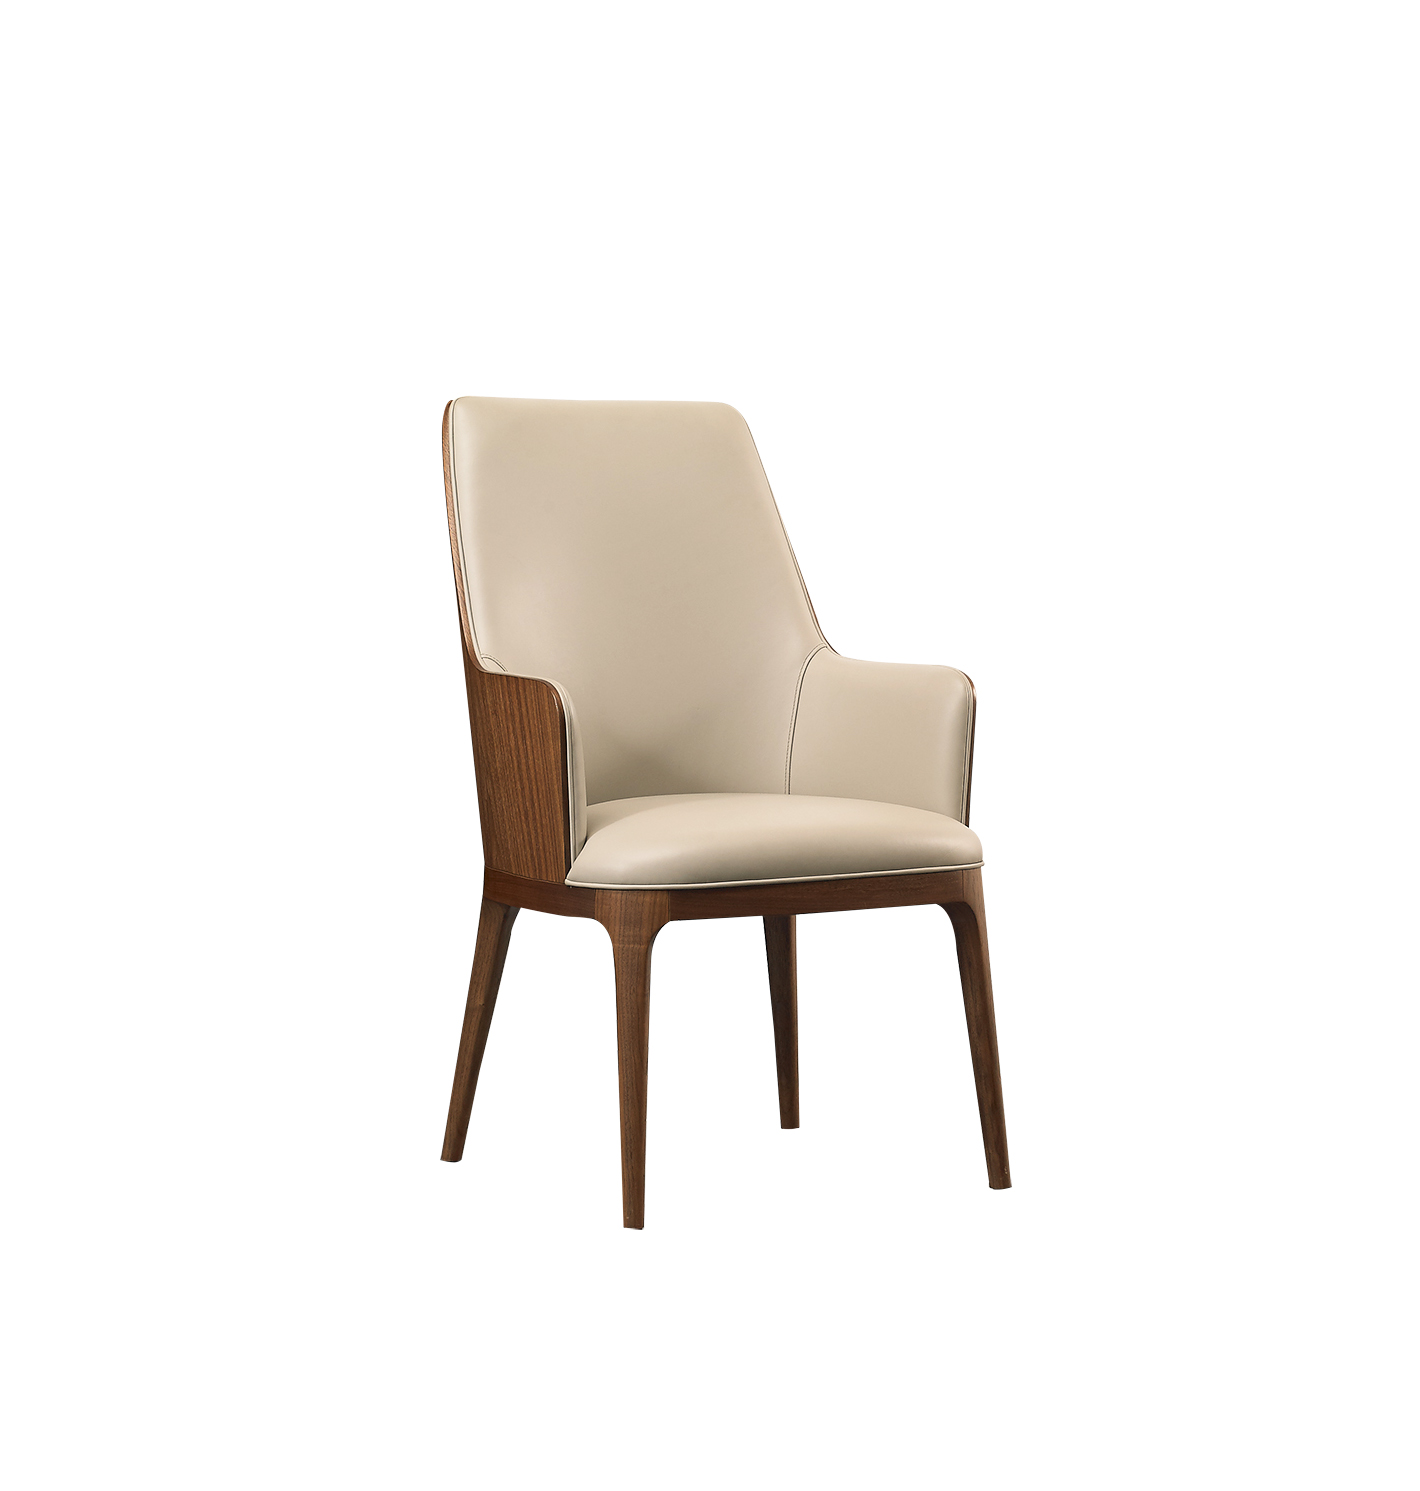 Modern Luxury Design Furniture Dining Room Chairs Dining Chairs